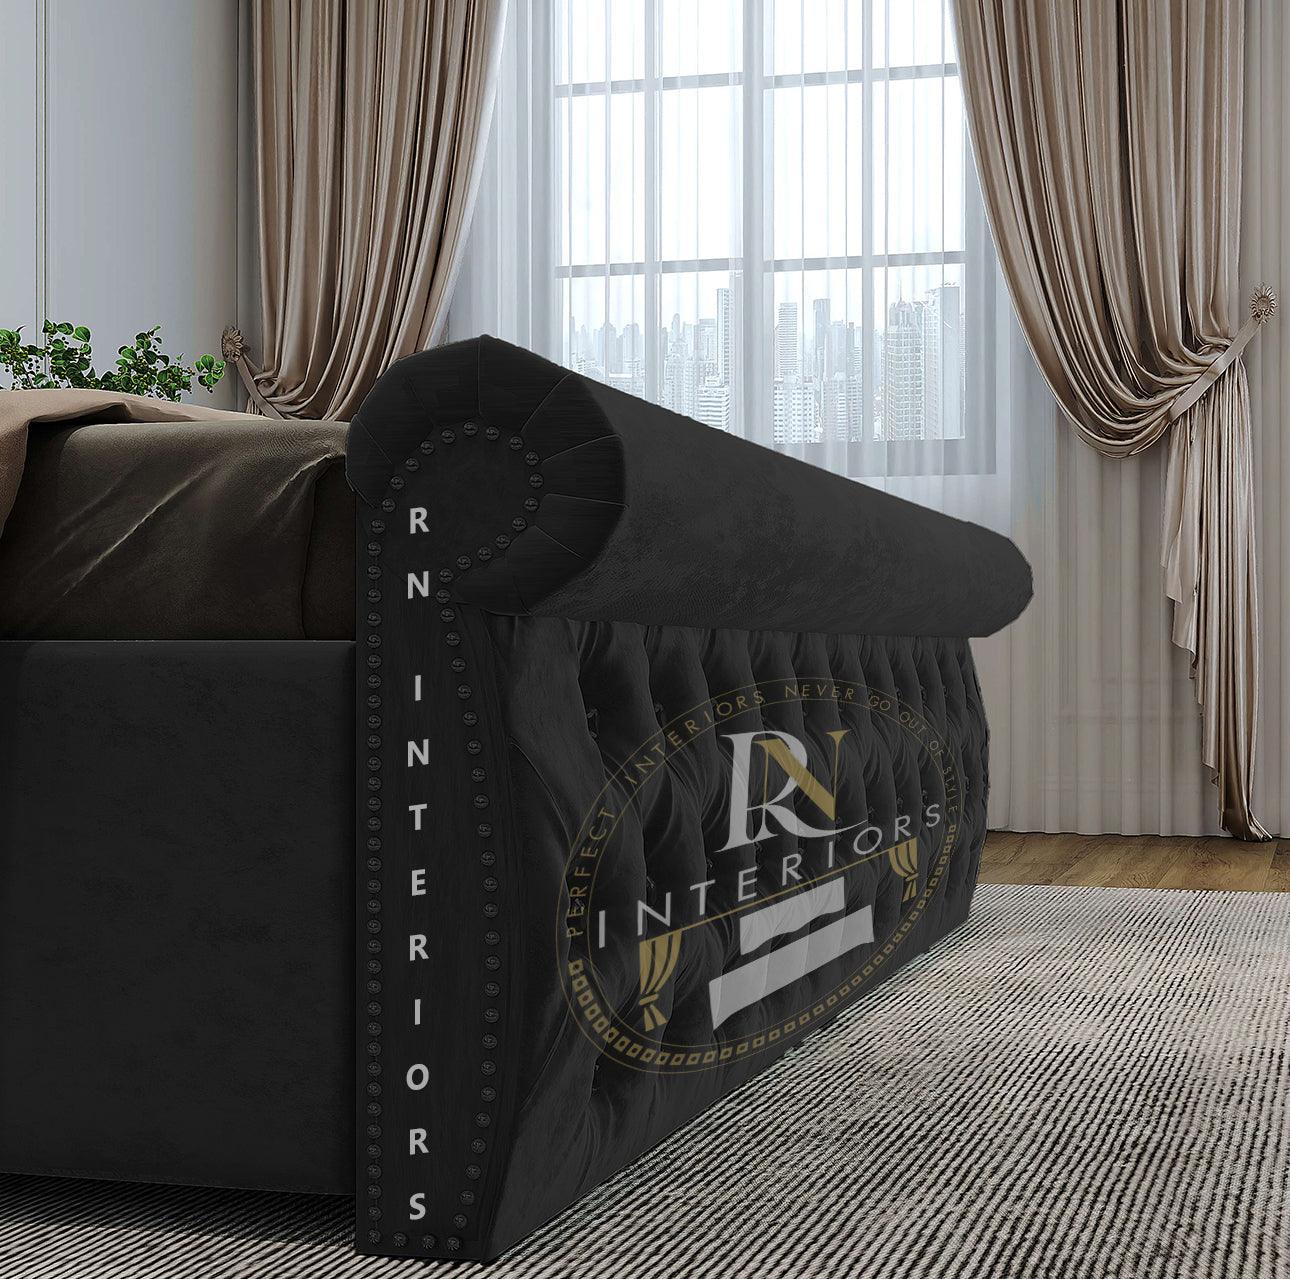 Chesterfield Ottoman Storage Bed with 49-Inch High Headboard in Demanding Color Options - Experience Plush Velvet Perfection | Chesterfield Buttoned Ottoman Bed with Storage (Black, Blue, Cream, Grey) - rn interiors, Chesterfield Ottoman Bed, Ottoman Storage Bed, High Headboard Bed, Velvet Upholstery, Solid Colour Bed, Tufted Rectangle Headboard, Gas Lift Ottoman Bed,Floor Standing Headboard, Quality Craftsmanship